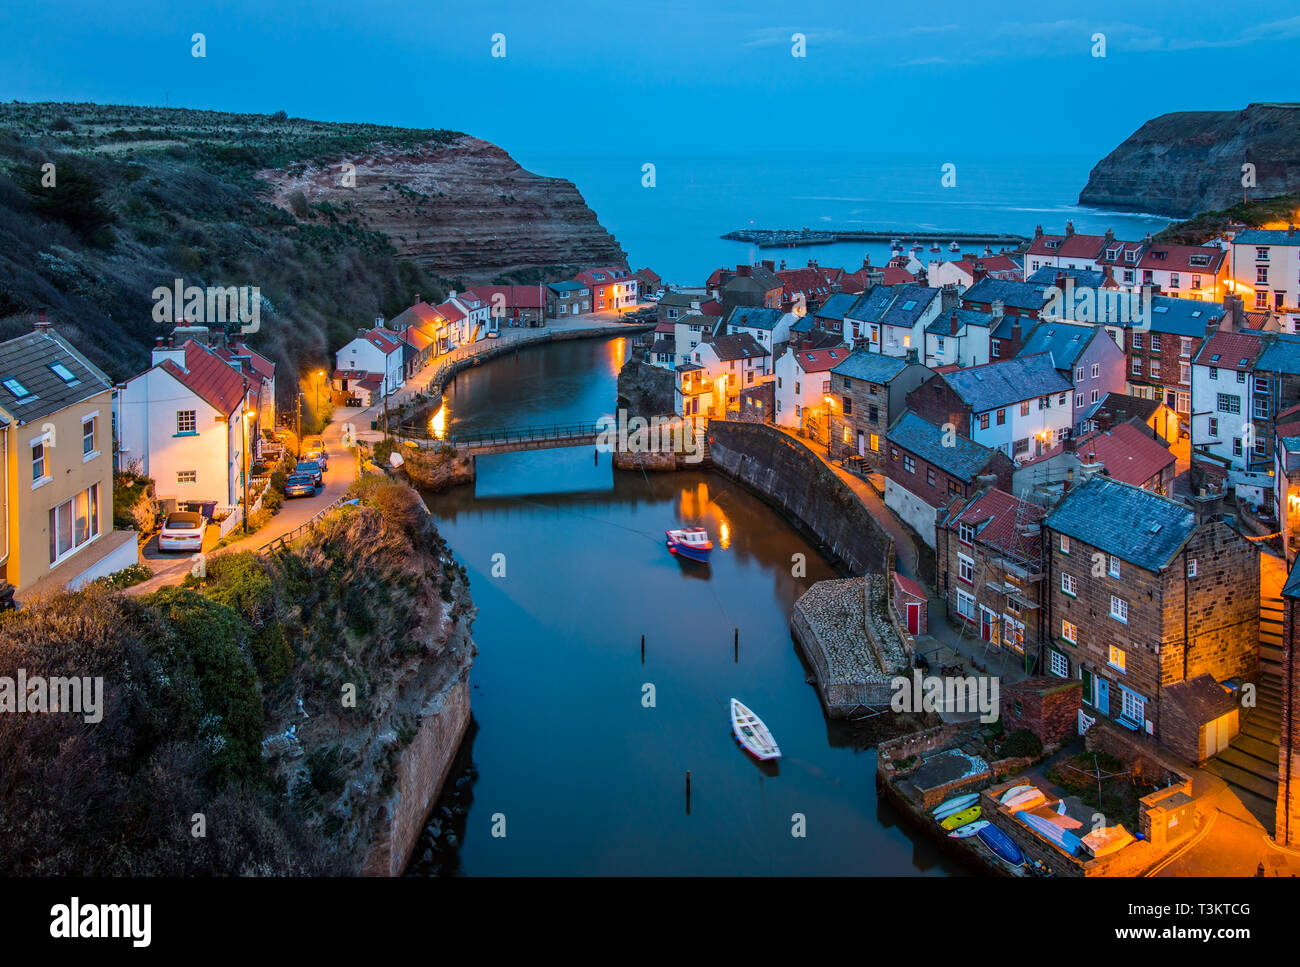 A classic view of Staithes at dusk & high tide, Staithes is a a traditional fishing village / seaside resort on the North Yorkshire coast, England UK. Stock Photo